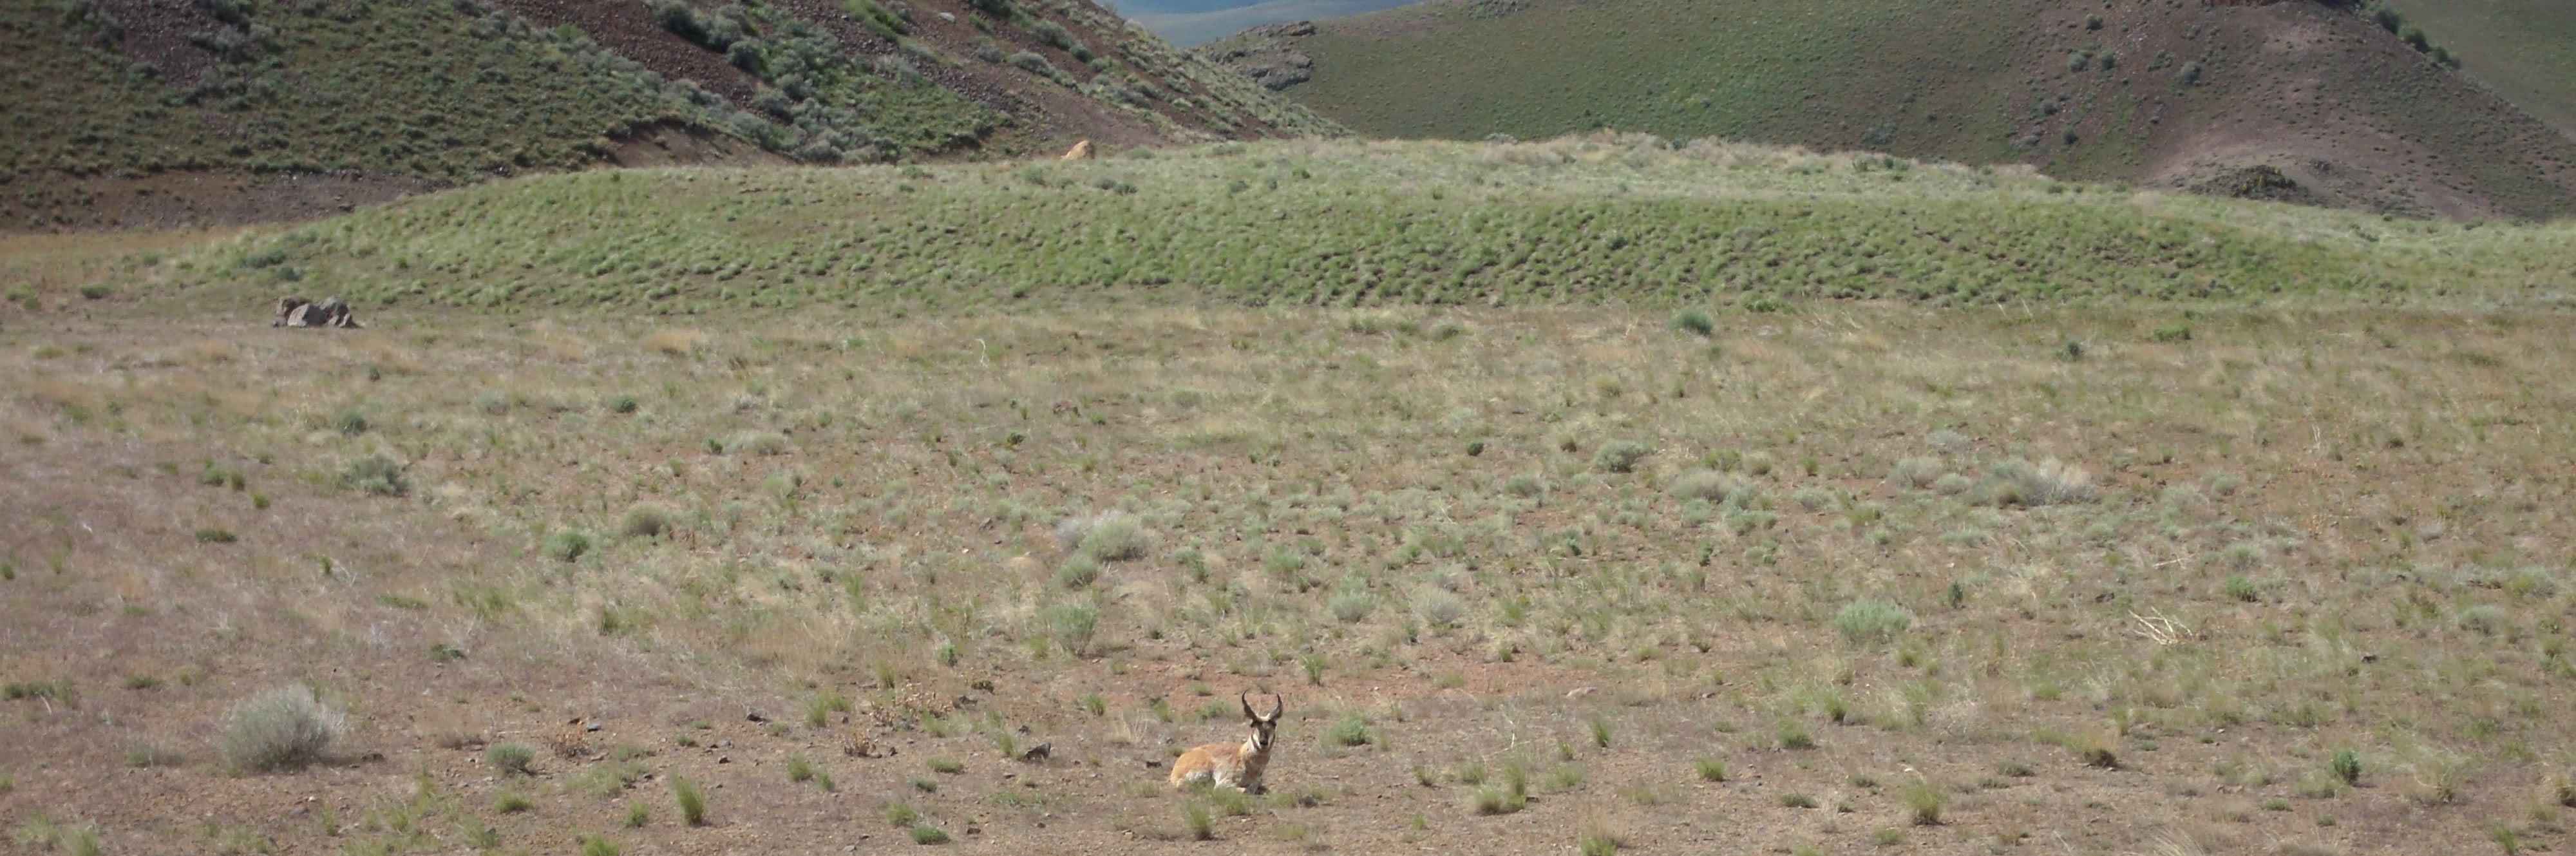 Reclaimed and well-vegetated heap leach pad with a pronghorn laying down in the foreground.